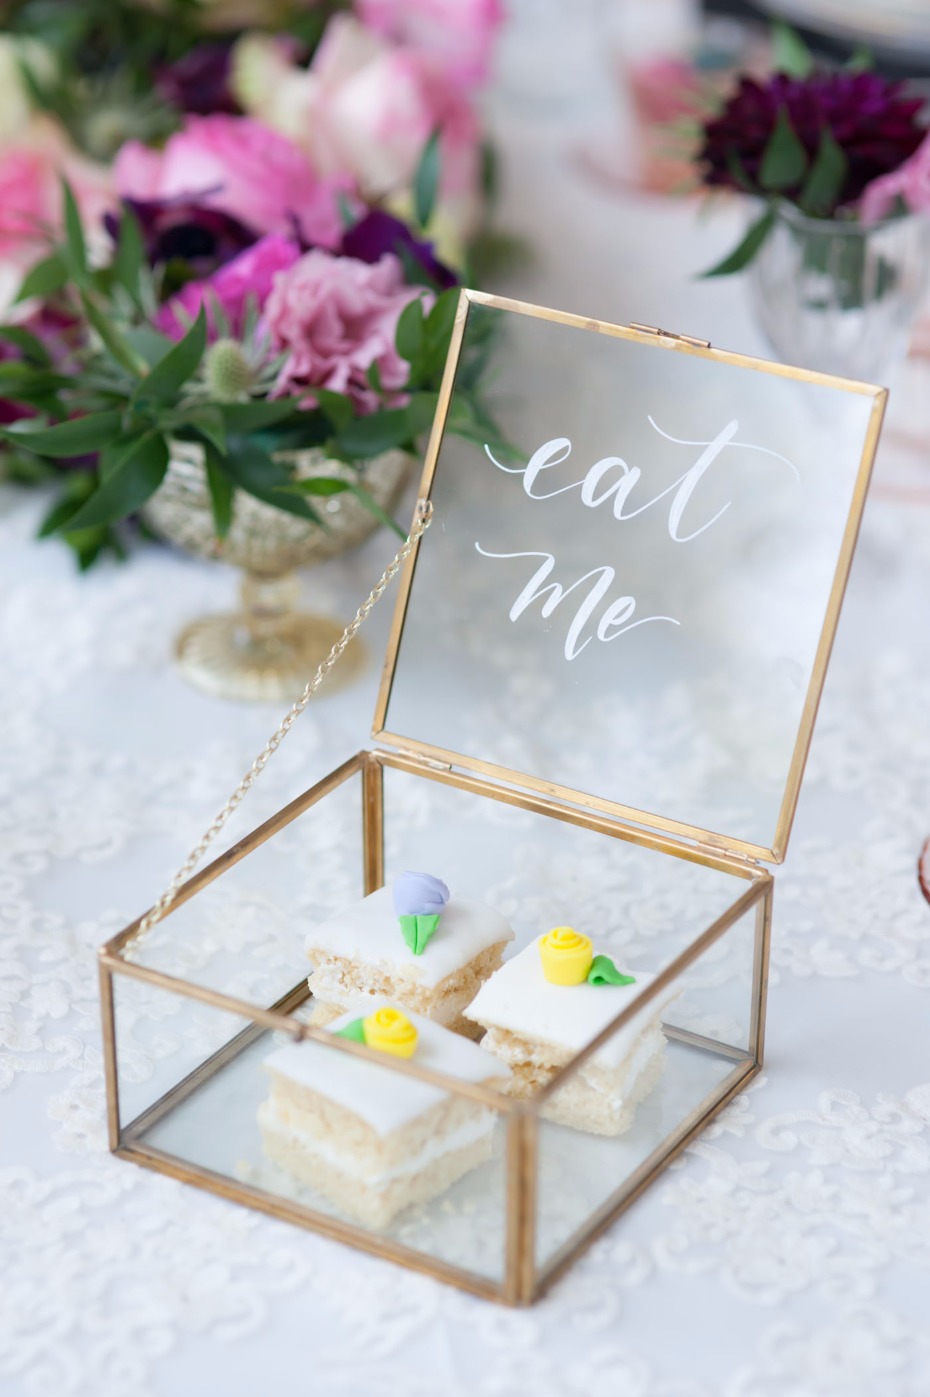 "Eat me" box of treats for an Alice in Wonderland wedding